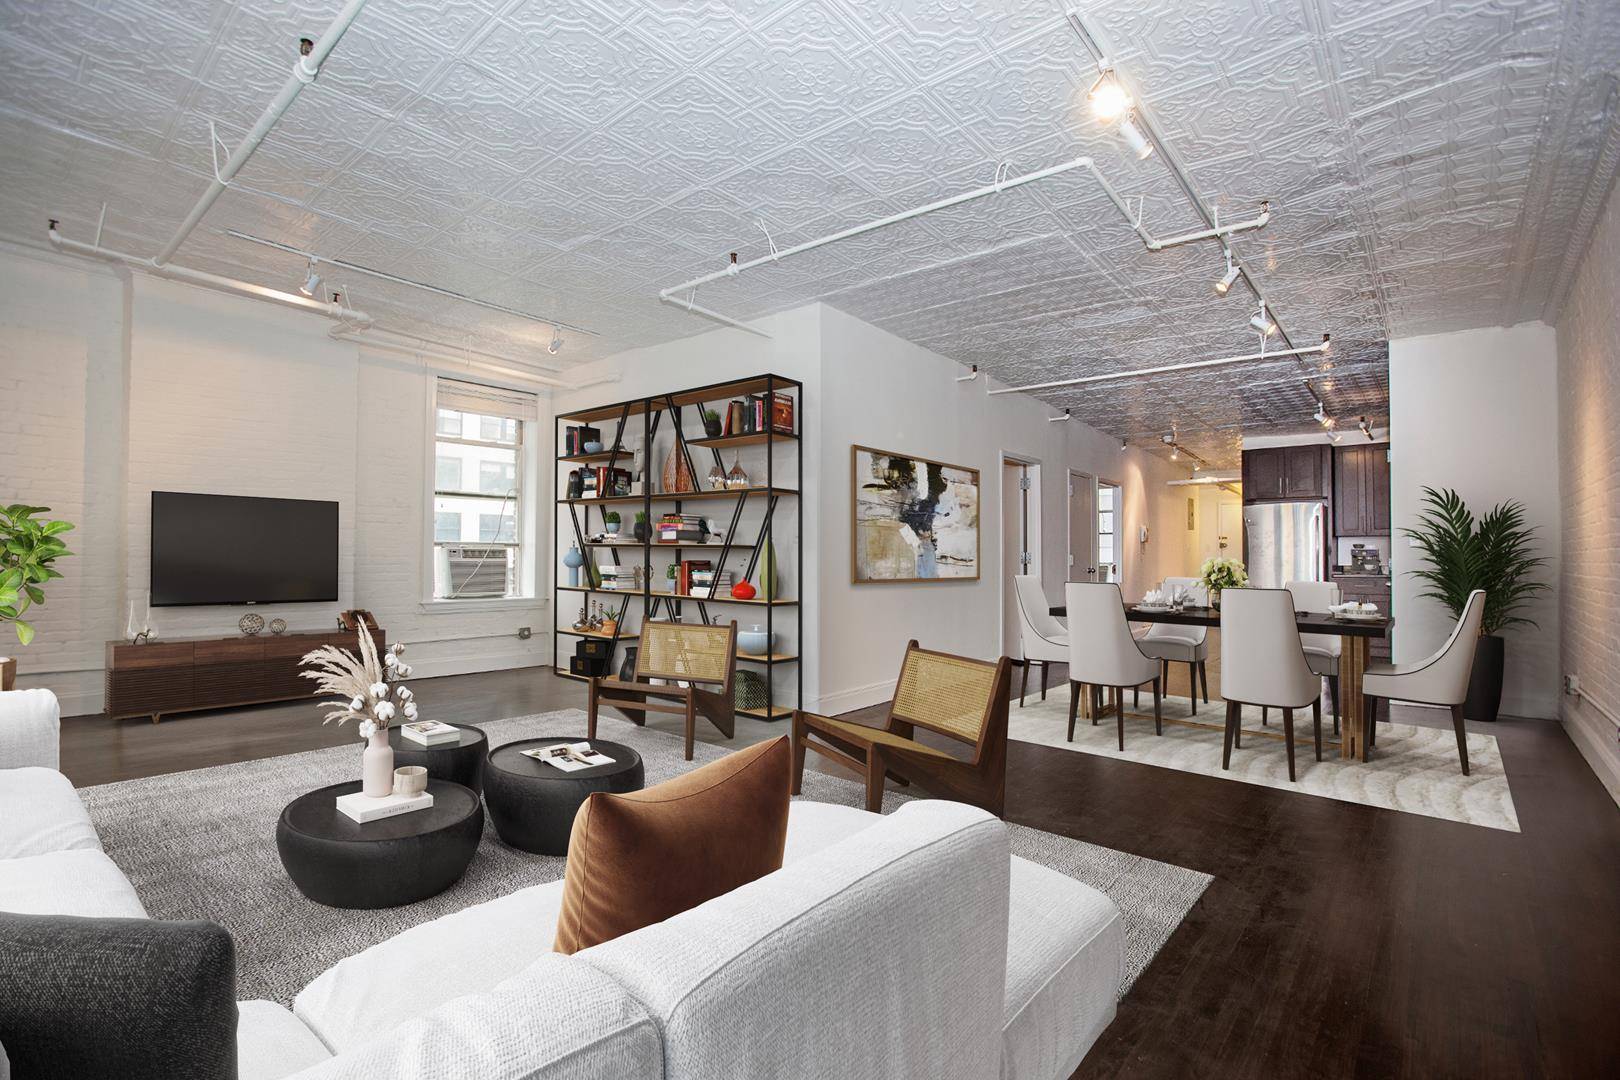 Dramatic loft with an expansive open layout, pleasant exposed white brick, accented gorgeously by dark hardwood floors throughout the home.